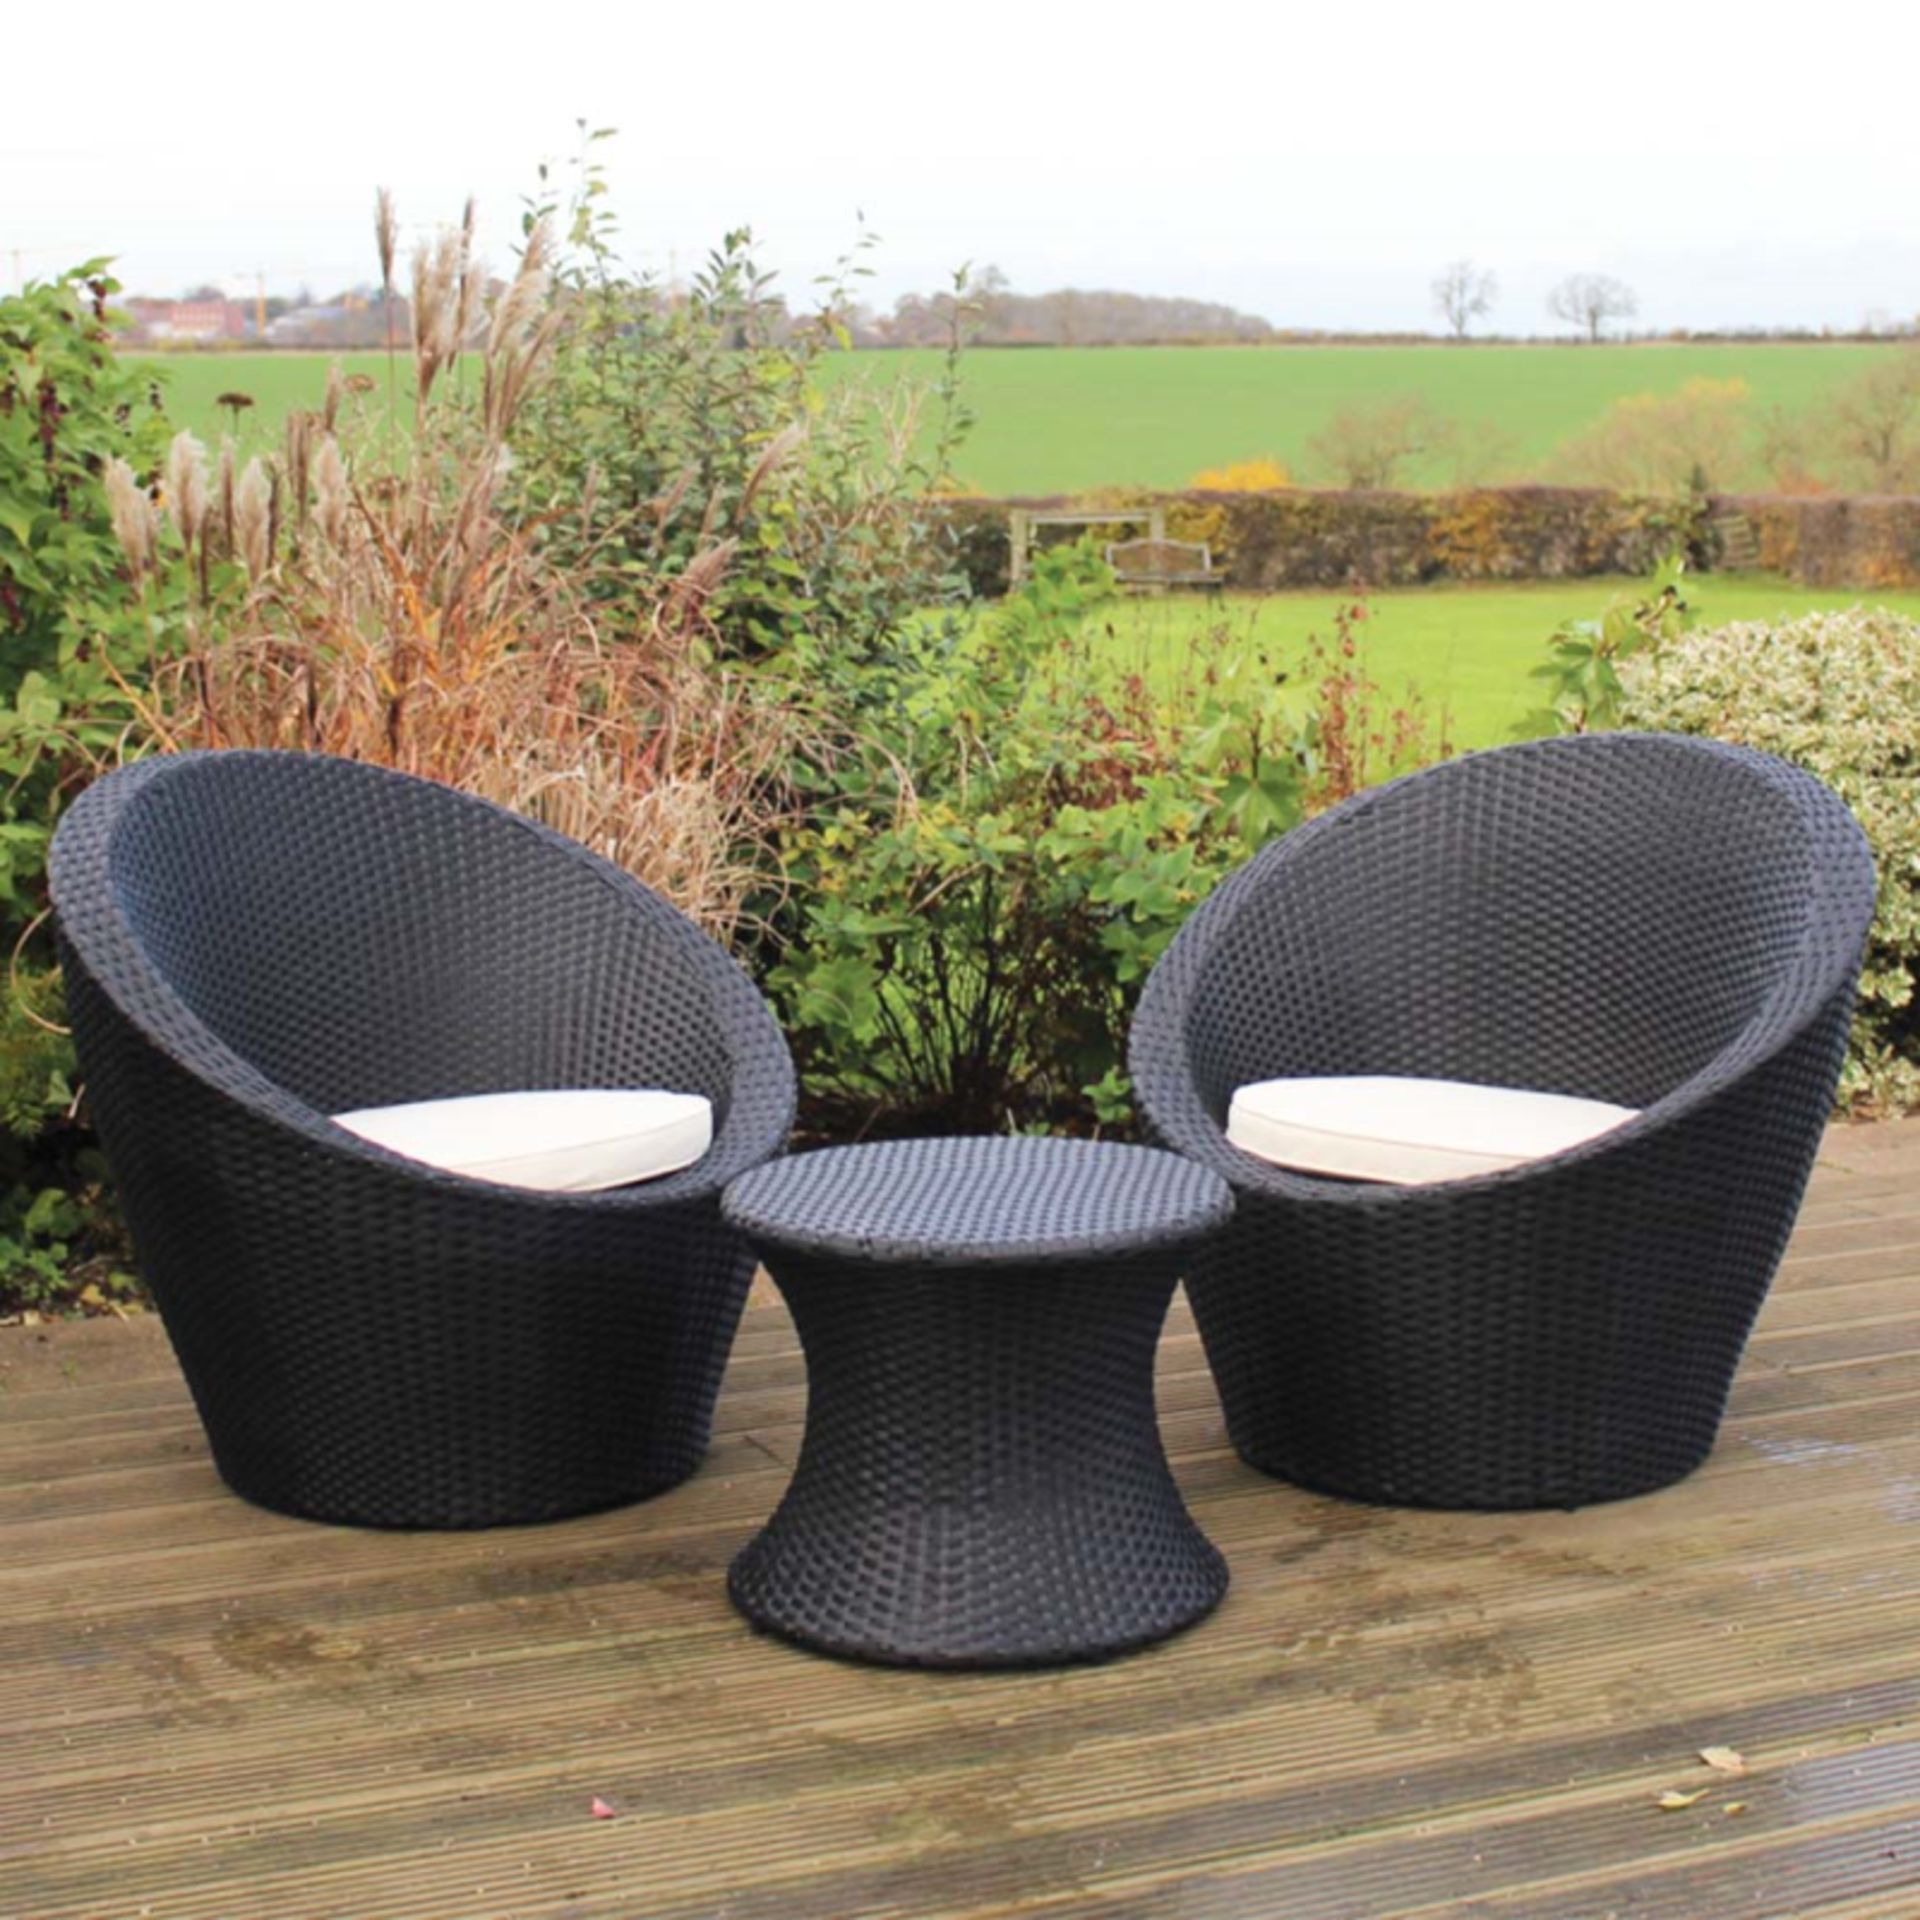 V Brand New Rattan Effect Table And Two Egg Chairs Bistro Set - Compact Stackable Design -